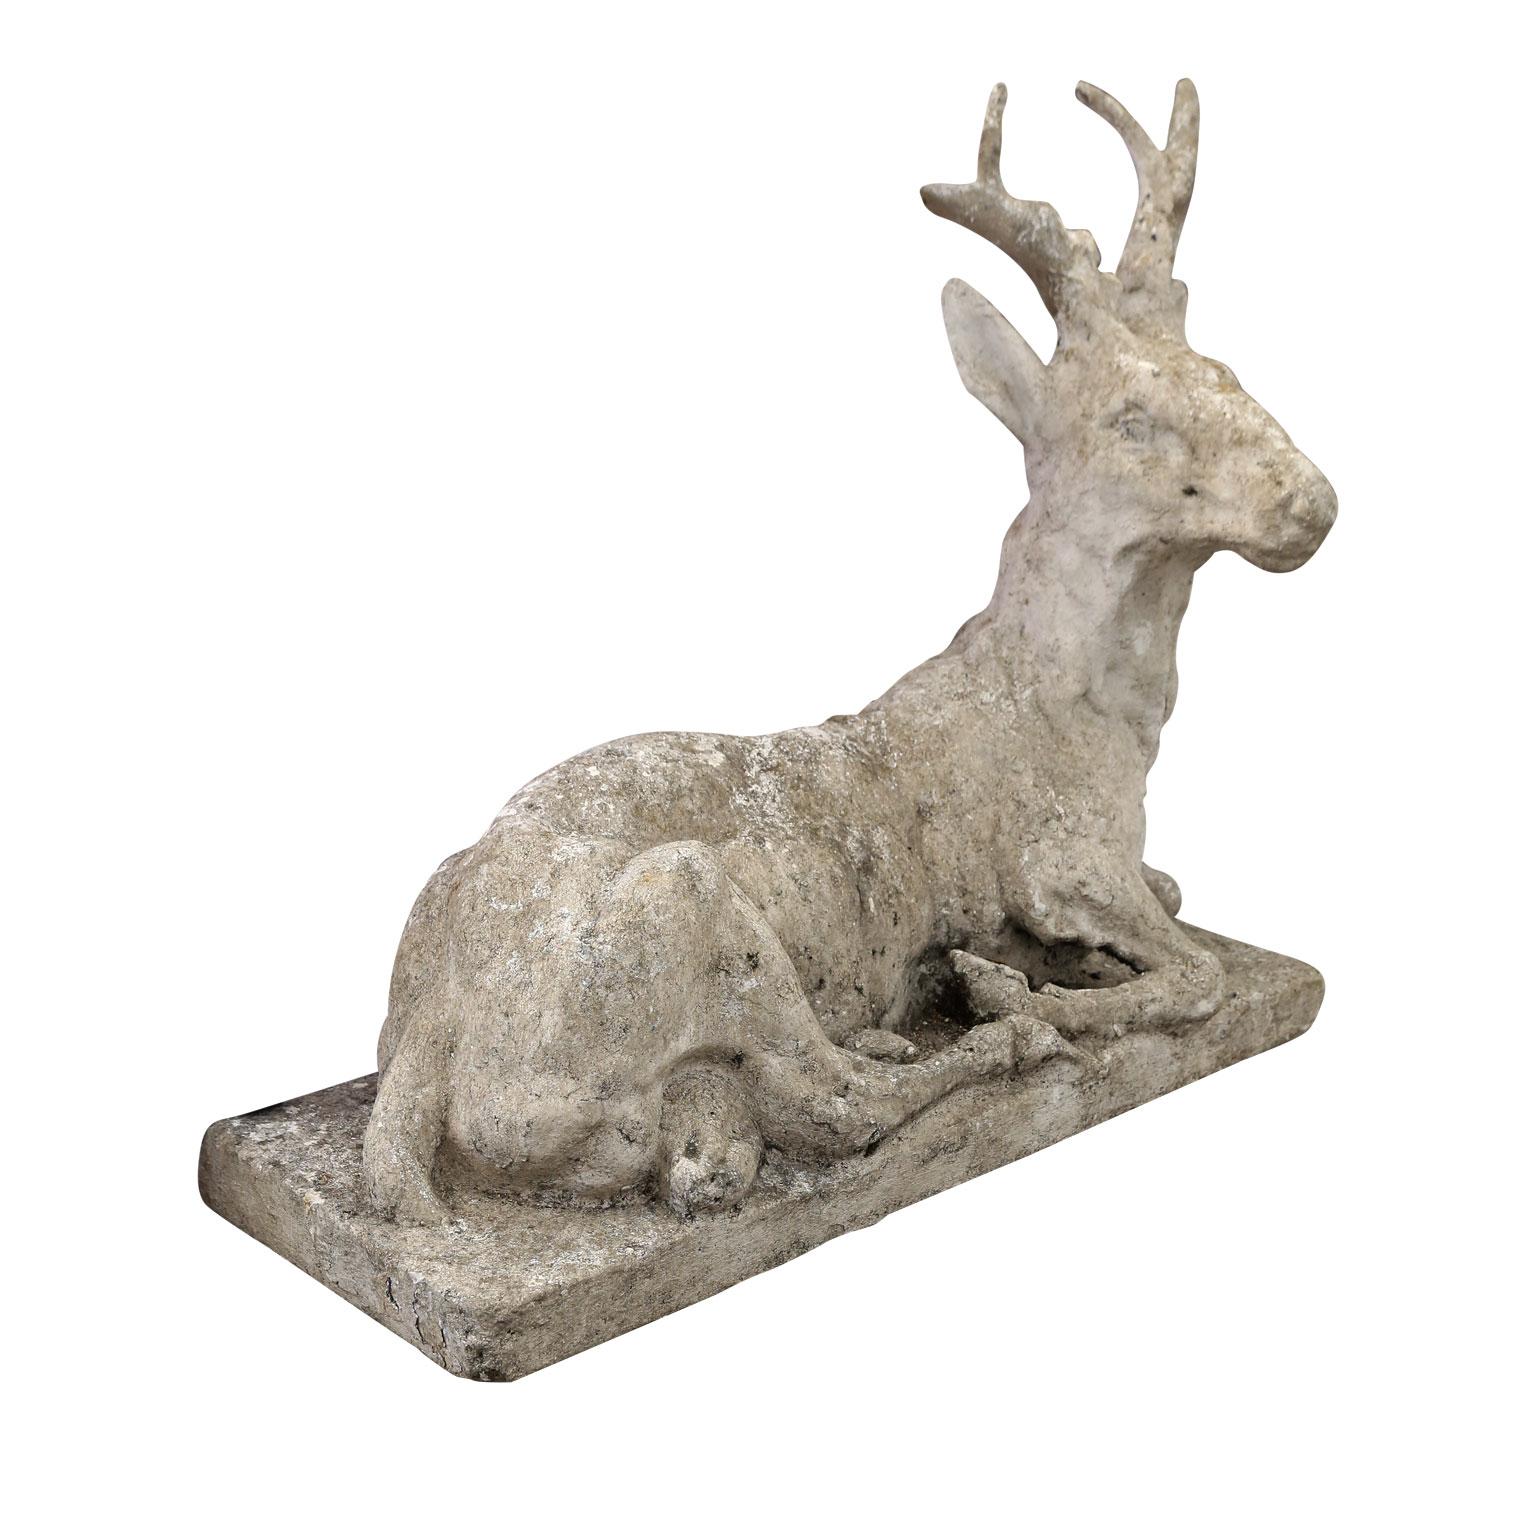 Vintage concrete stag sculpture, a stately depiction of a noble stag at rest, hand-modeled by an anonymous master artist in France using concrete during the early 20th century.